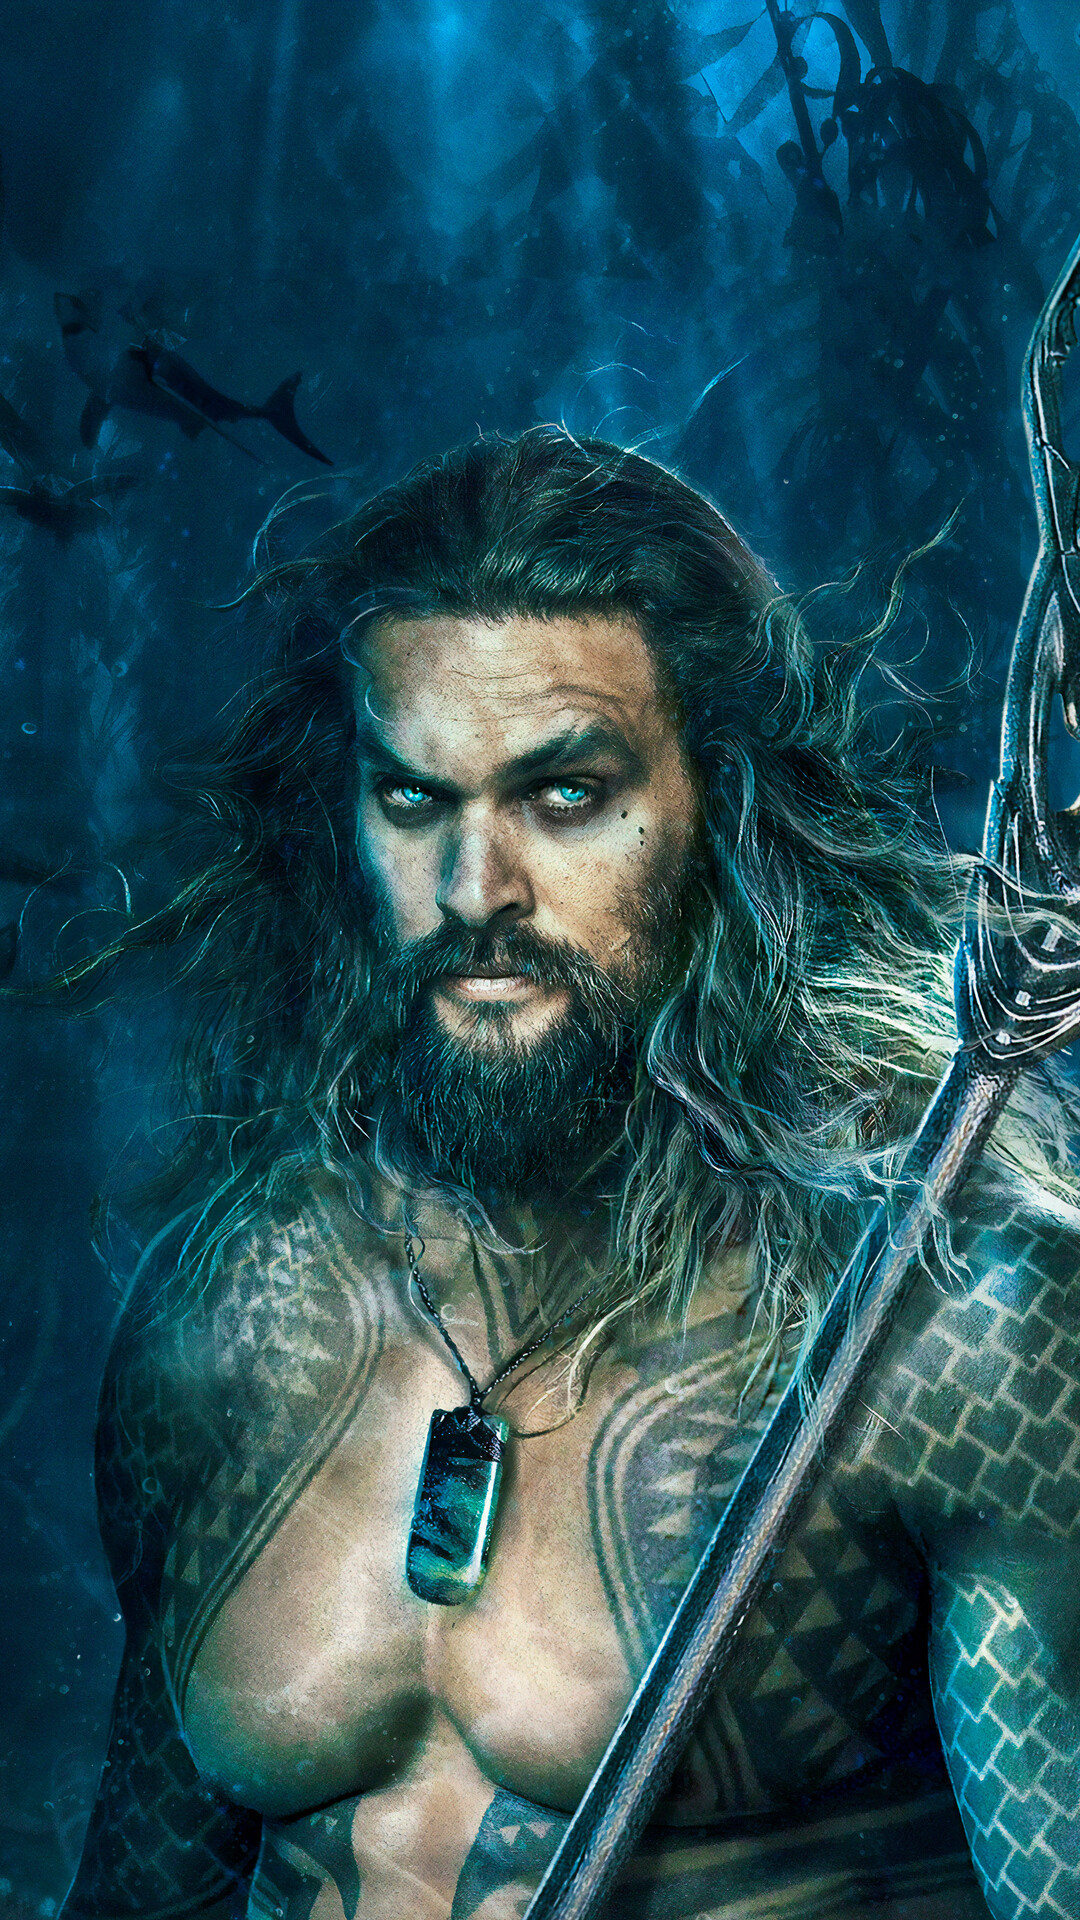 Aquaman and the Lost Kingdom: A superhero appearing in American comic books published by DC Comics. 1080x1920 Full HD Wallpaper.